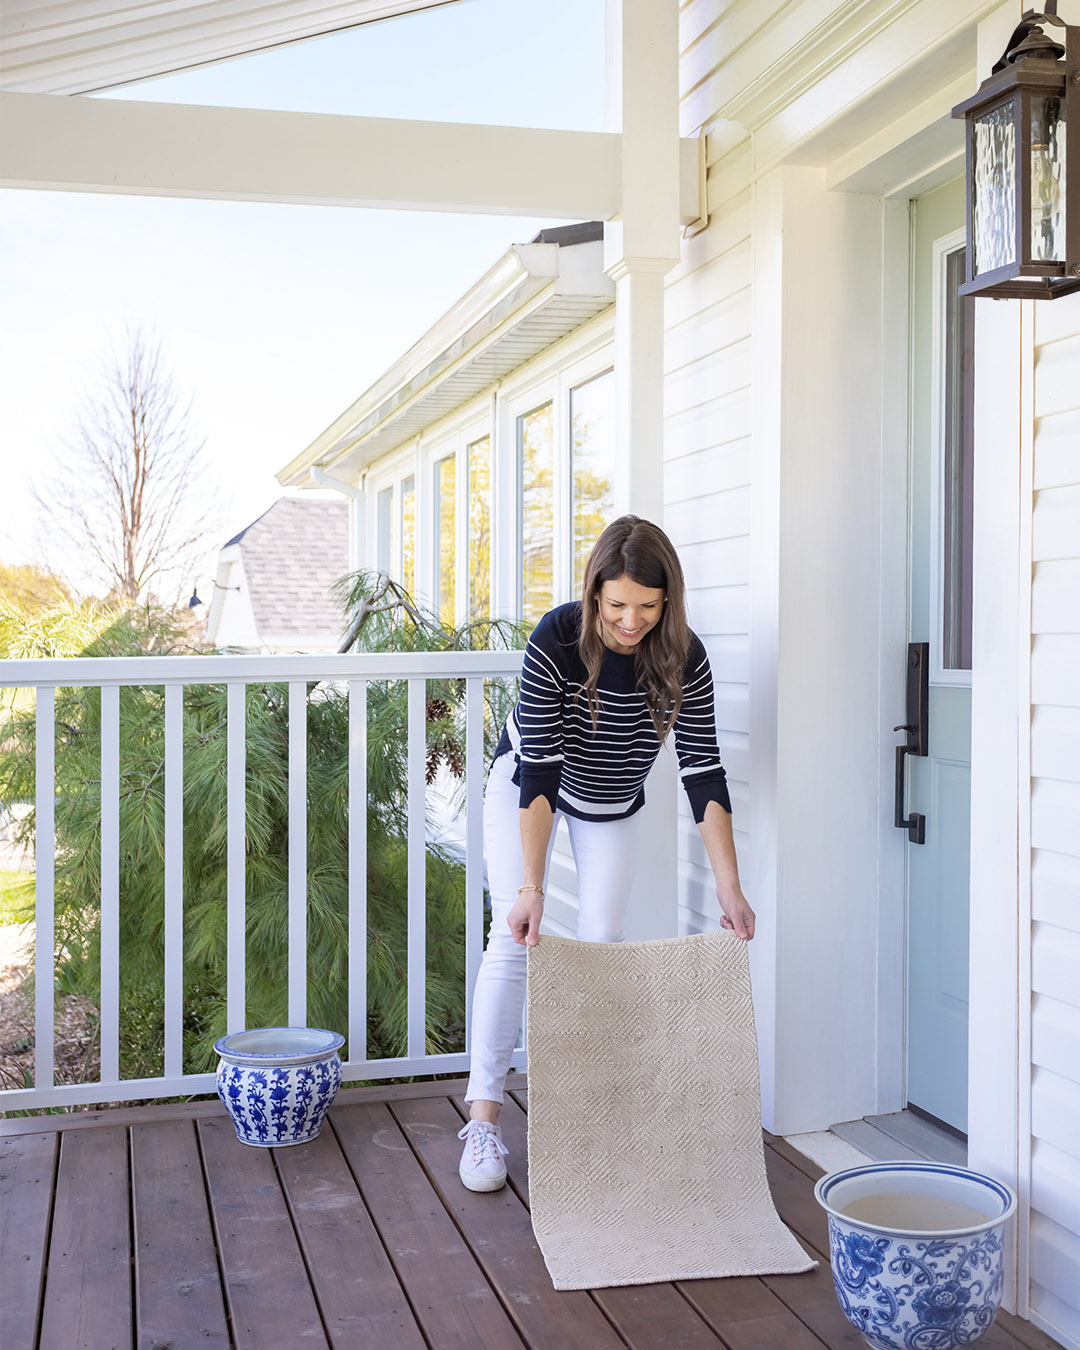 Use this list of what to clean in April as your simple guide to what jobs need to be tackled this month around the house.